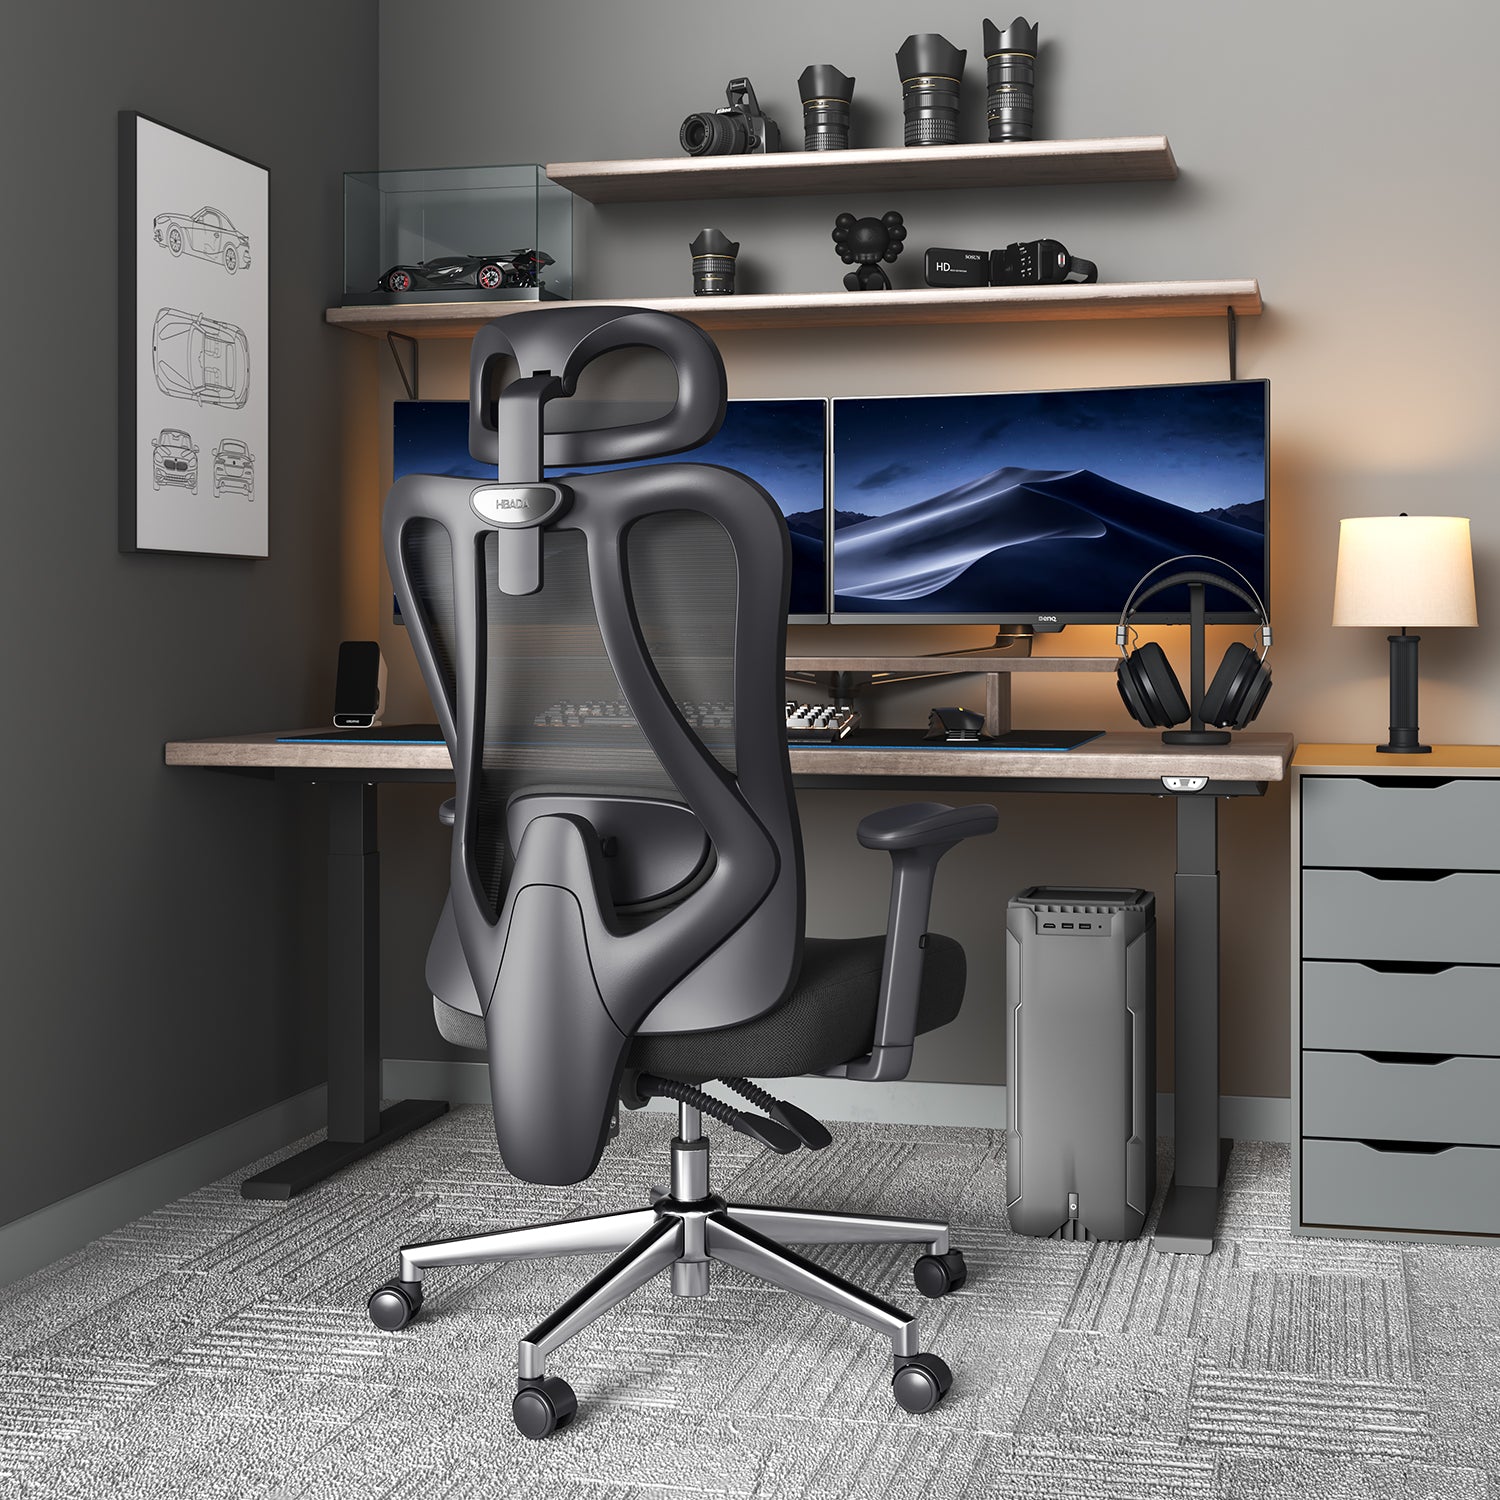 HBADA Ergonomic Office Chair, Desk Chair without footrest,P3 Series